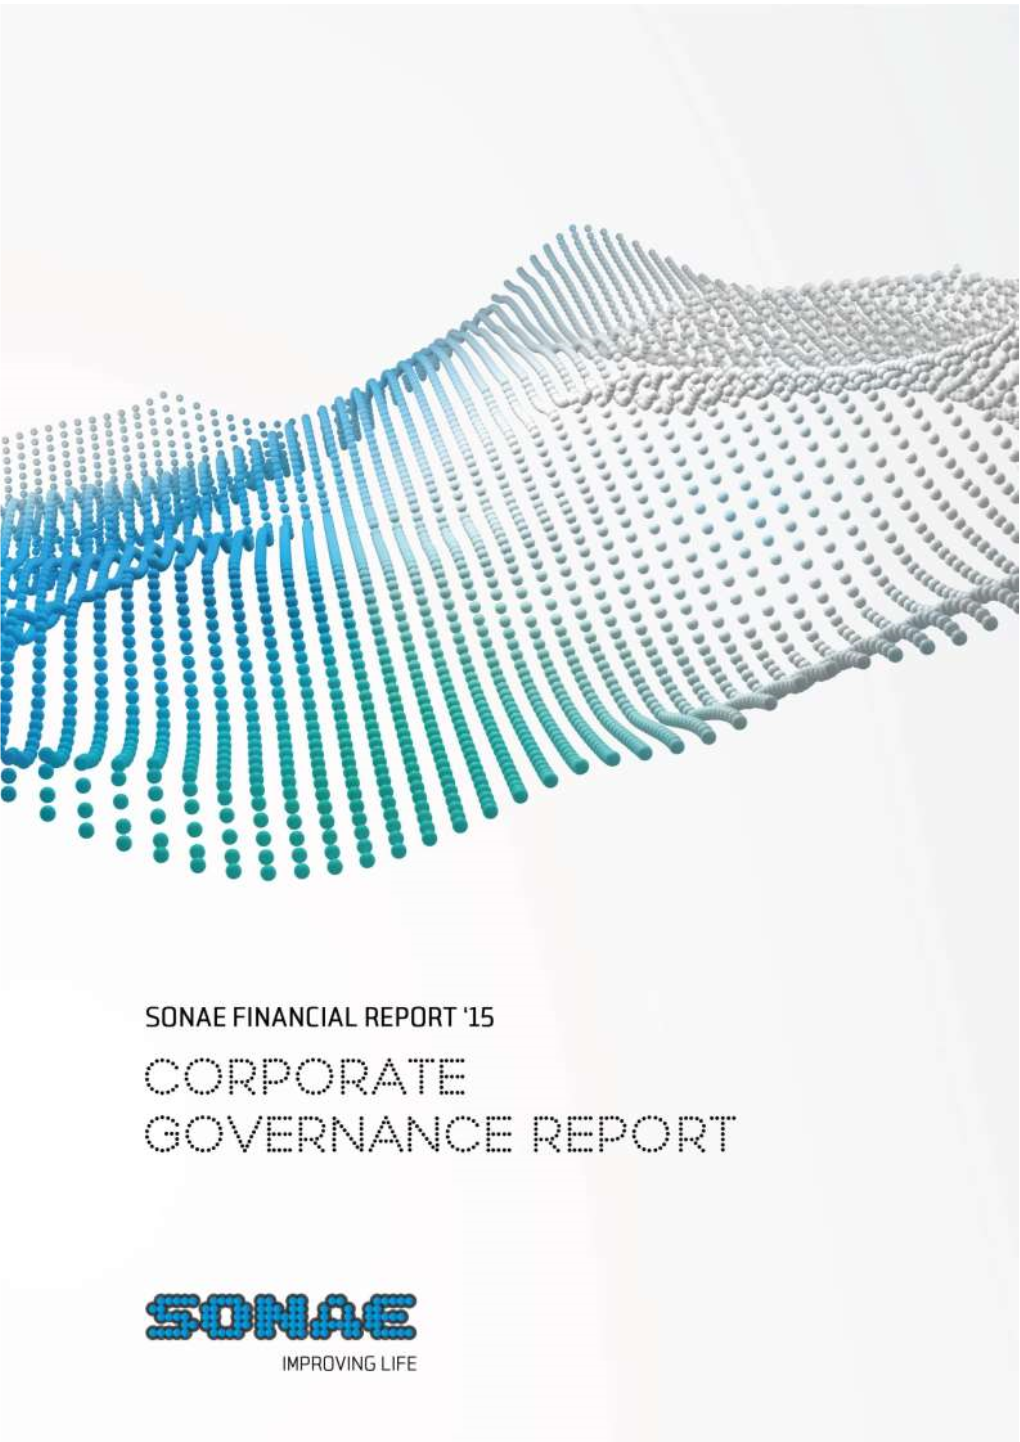 Governance Report Includes the Information Referred to in Article 245 of the Portuguese Securities Code